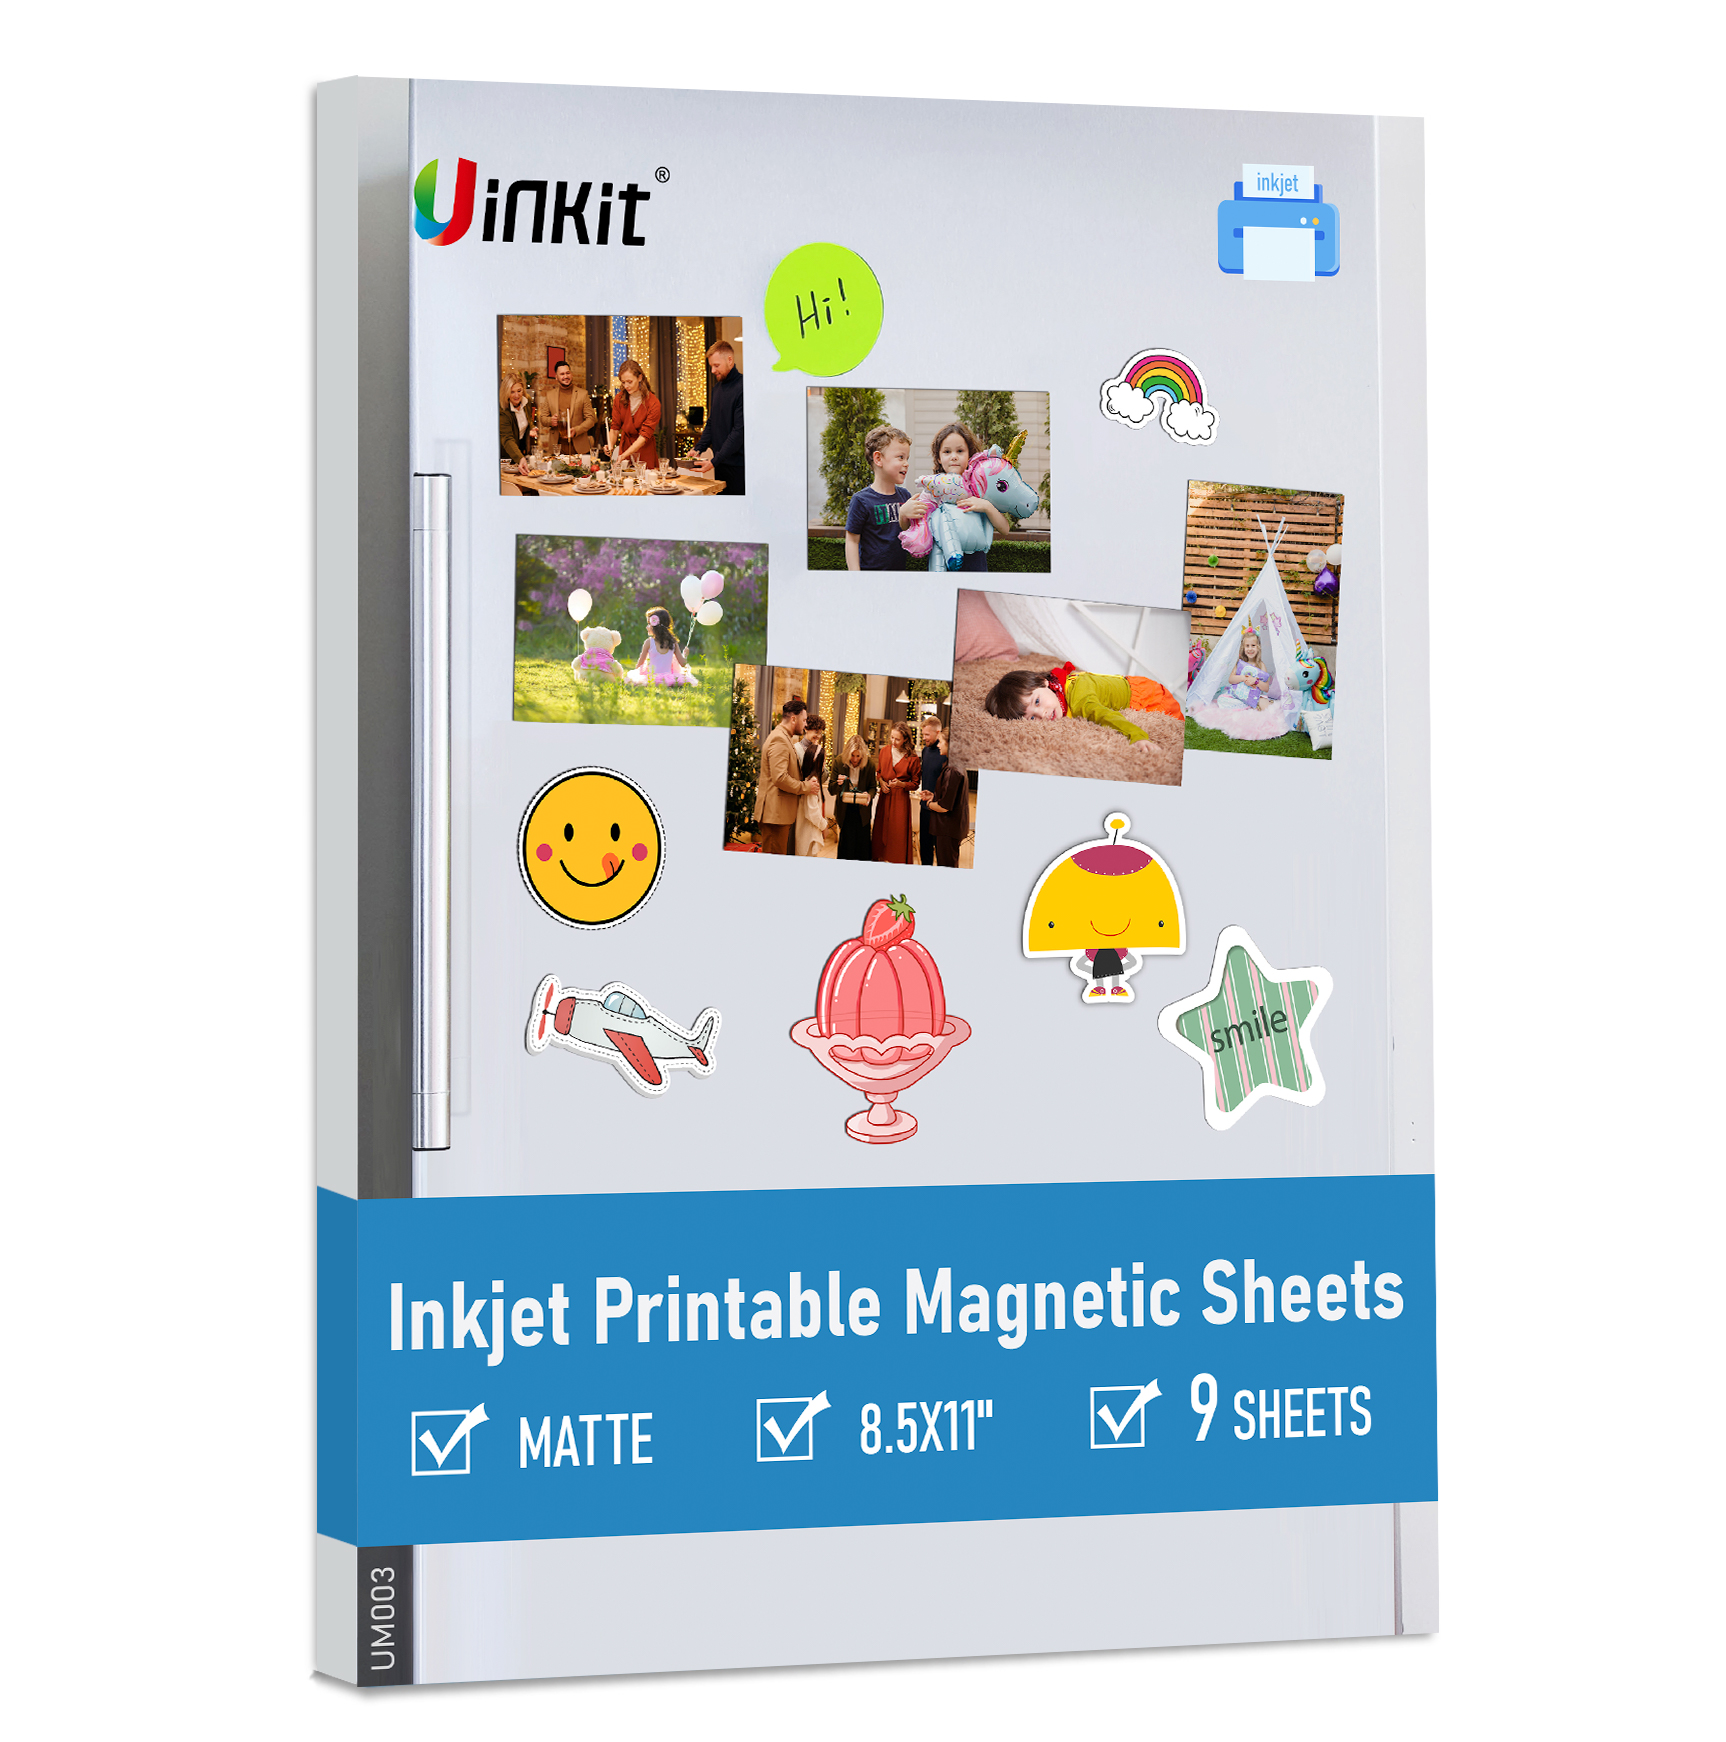  Printable Magnetic Sheets - Each 8.5 X 11